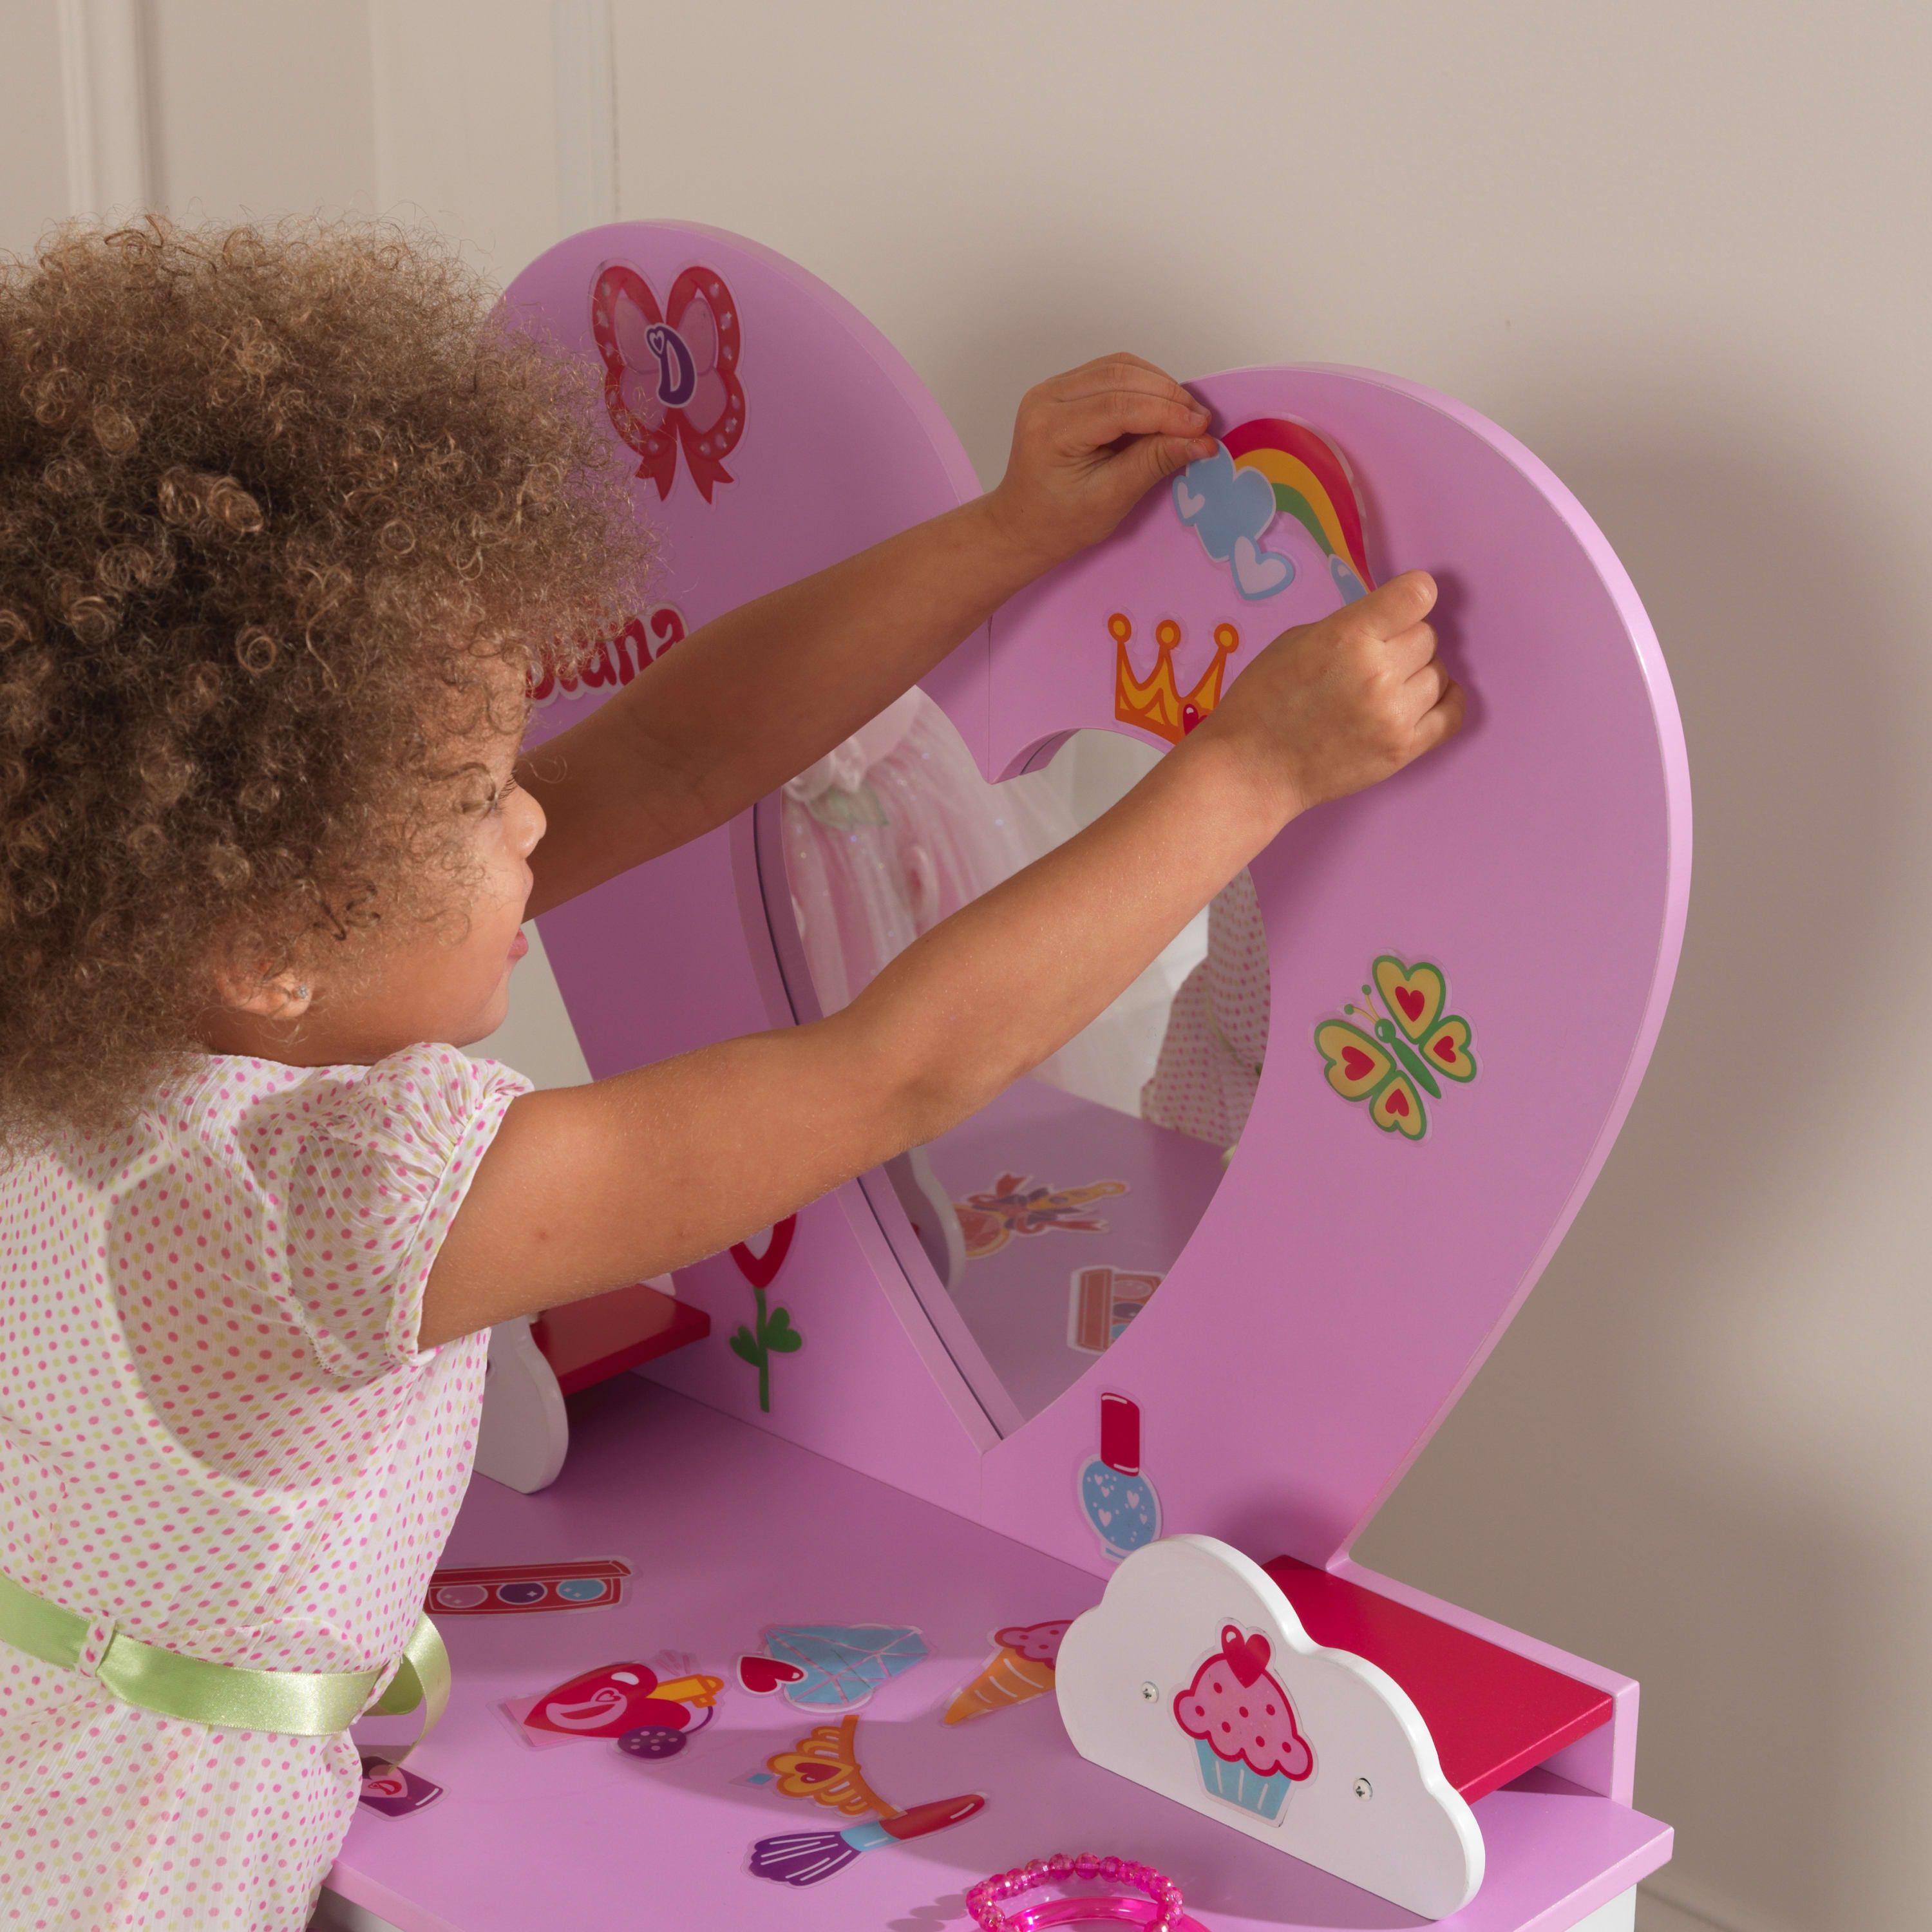 KidKraft Love, Diana™ Wood Heart Vanity Toy Set with Stool & Stickers for Personalization - image 3 of 8